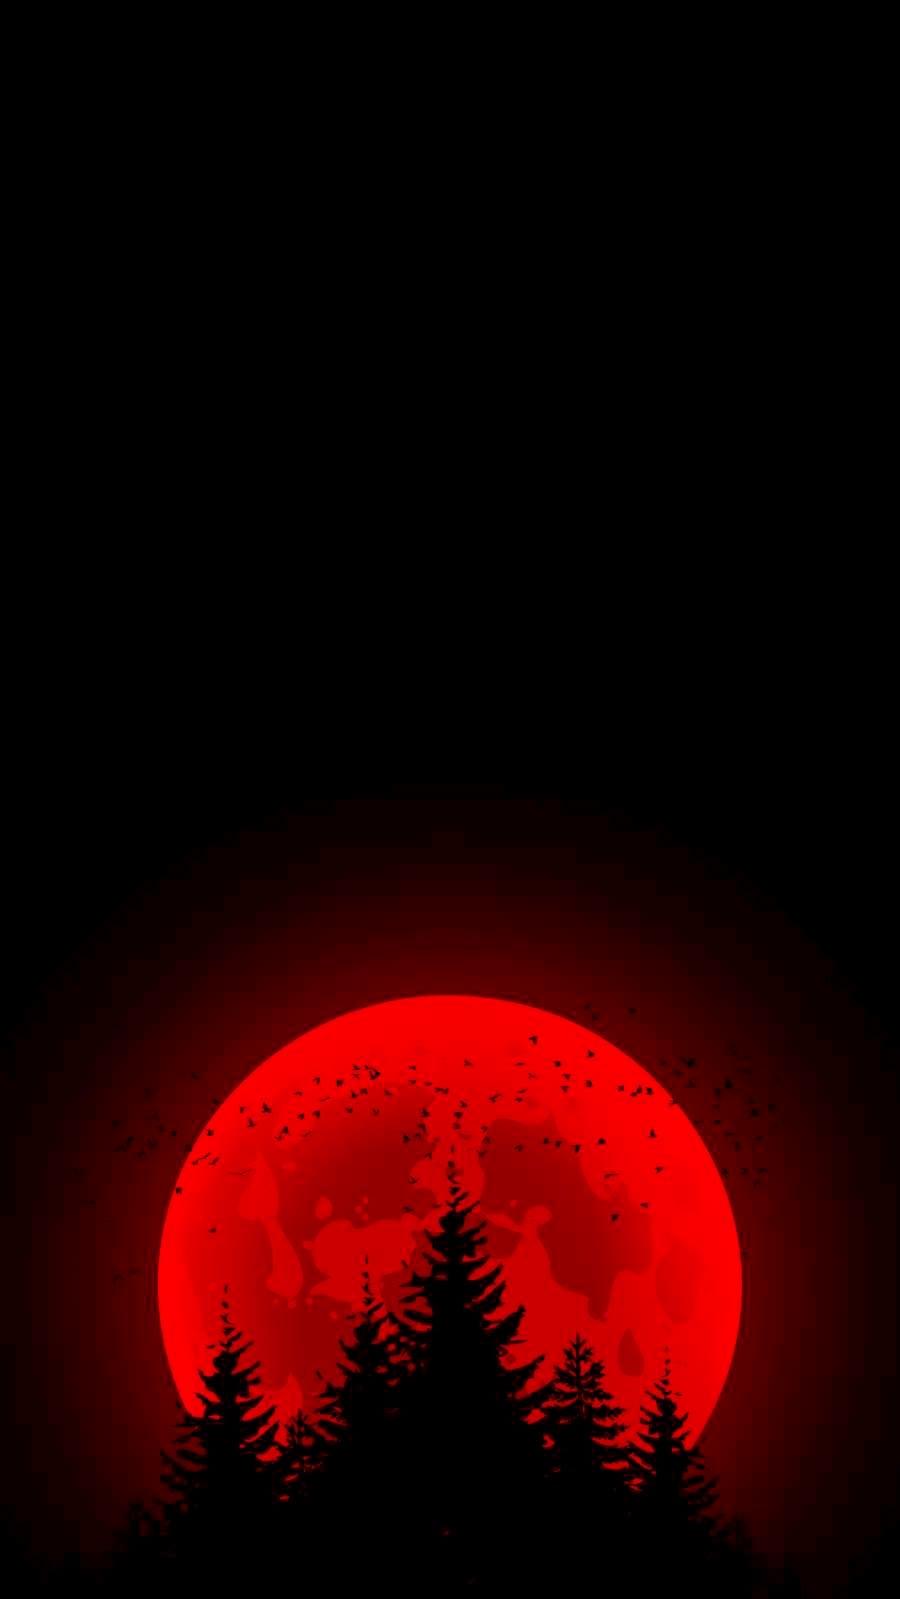 100+] Black Red Iphone Wallpapers | Wallpapers.com